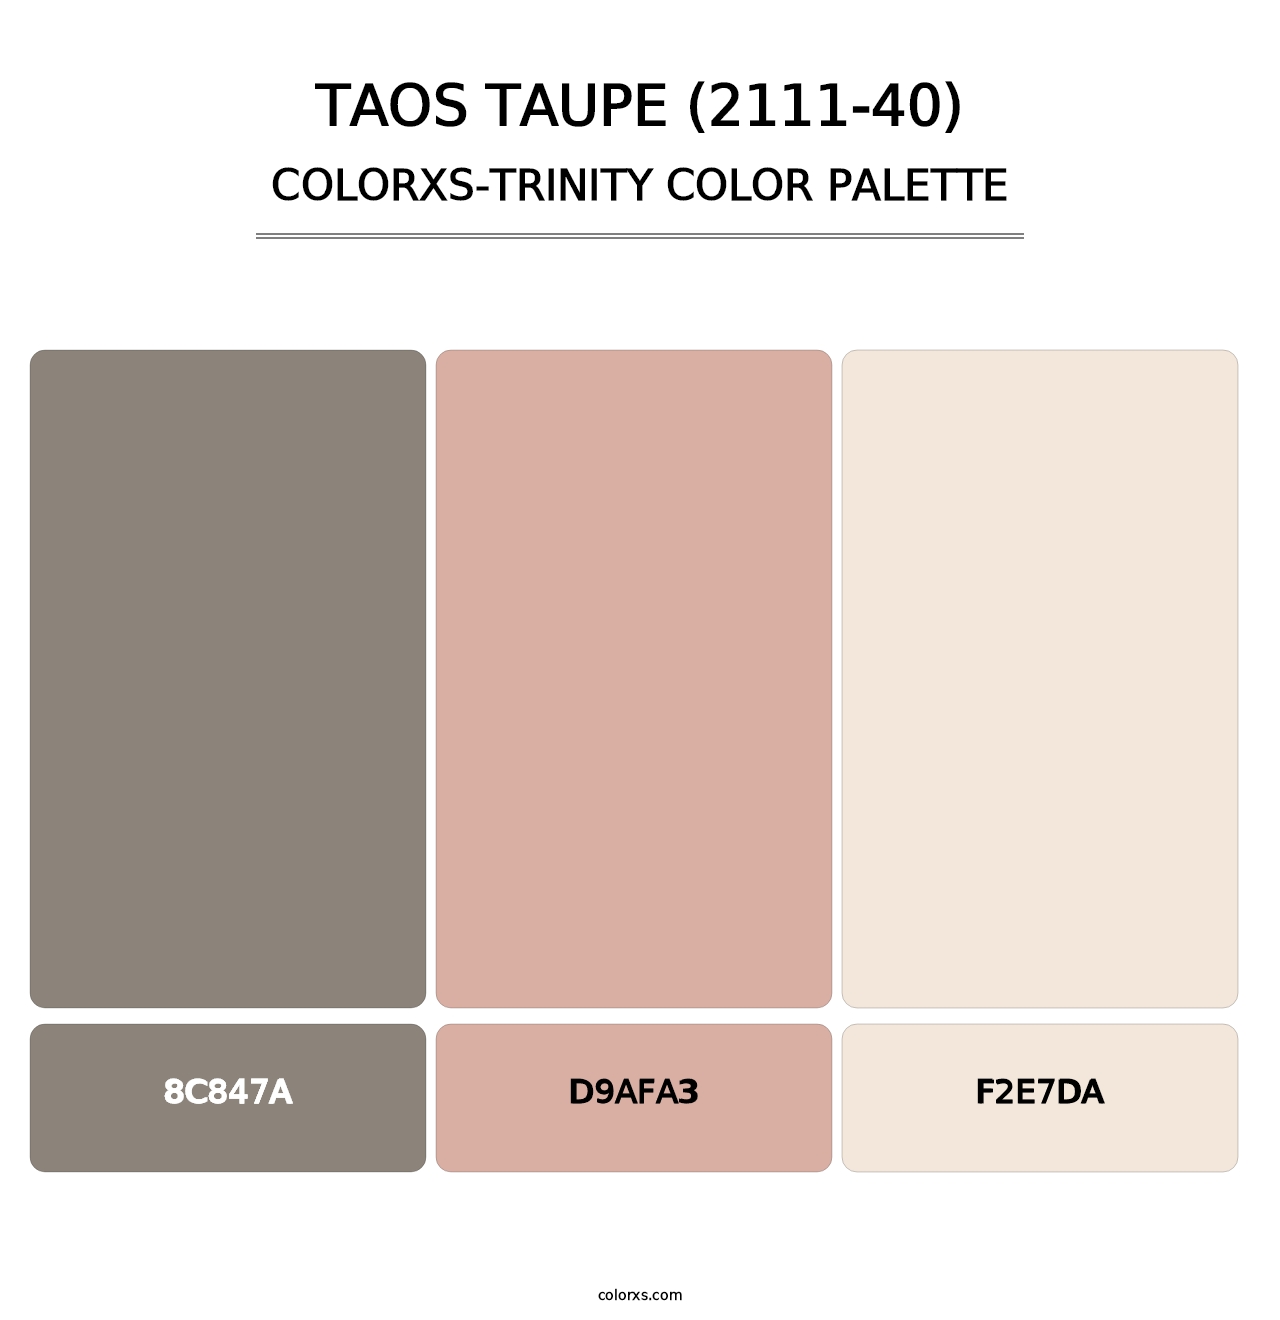 Taos Taupe (2111-40) - Colorxs Trinity Palette